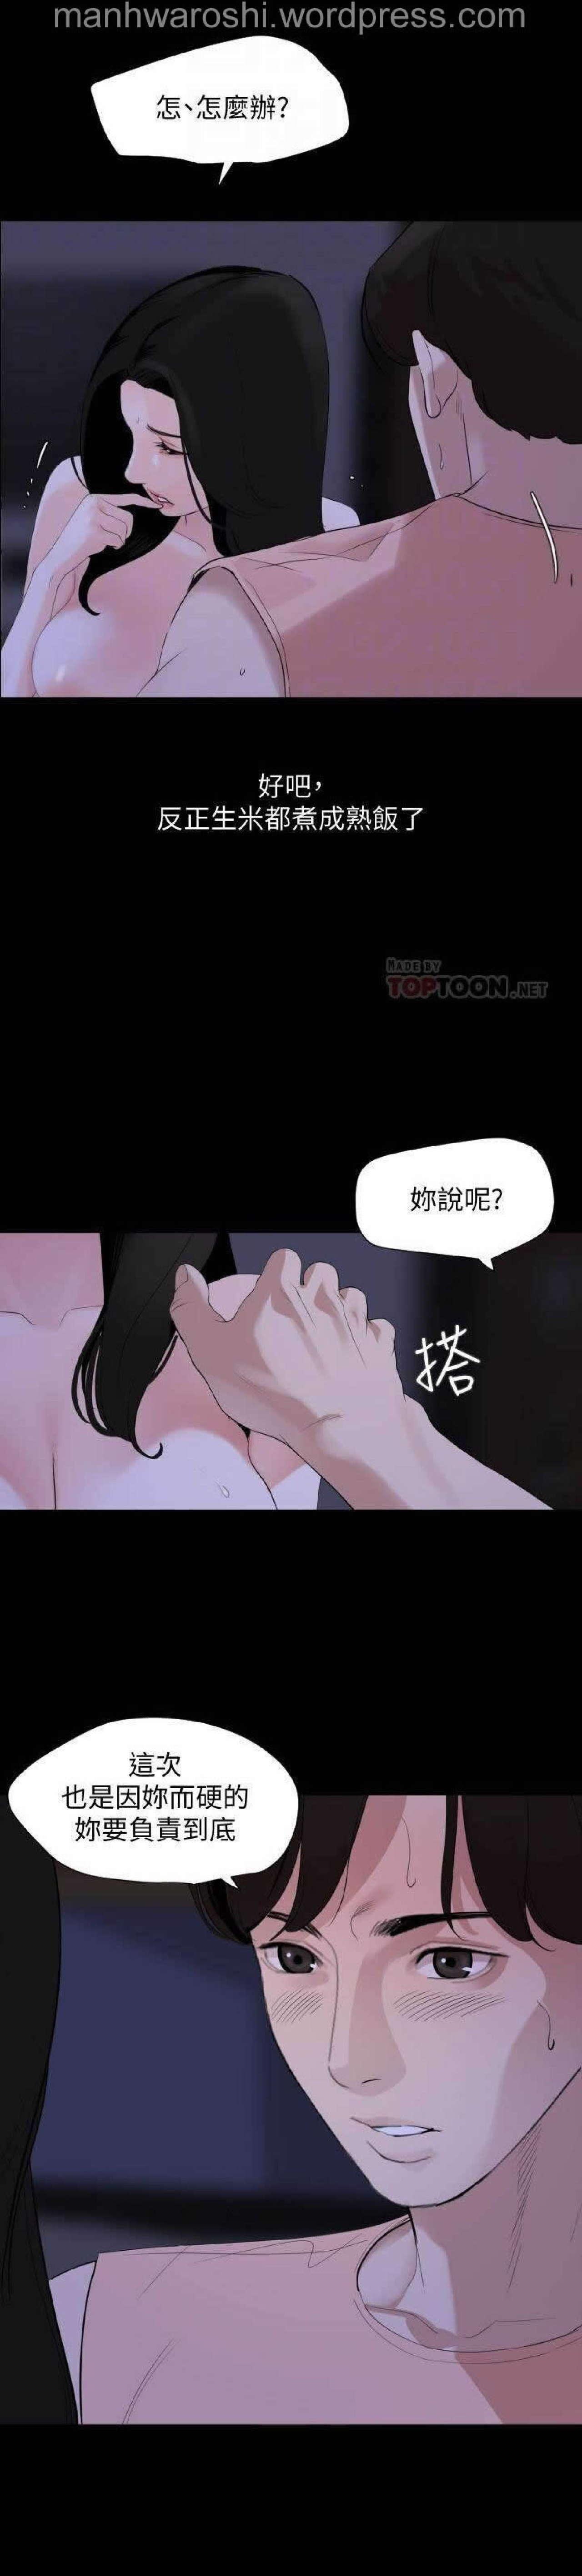 Don’t Be Like This! Son-In-Law | 与岳母同屋 第 6 [Chinese] Manhwa 5